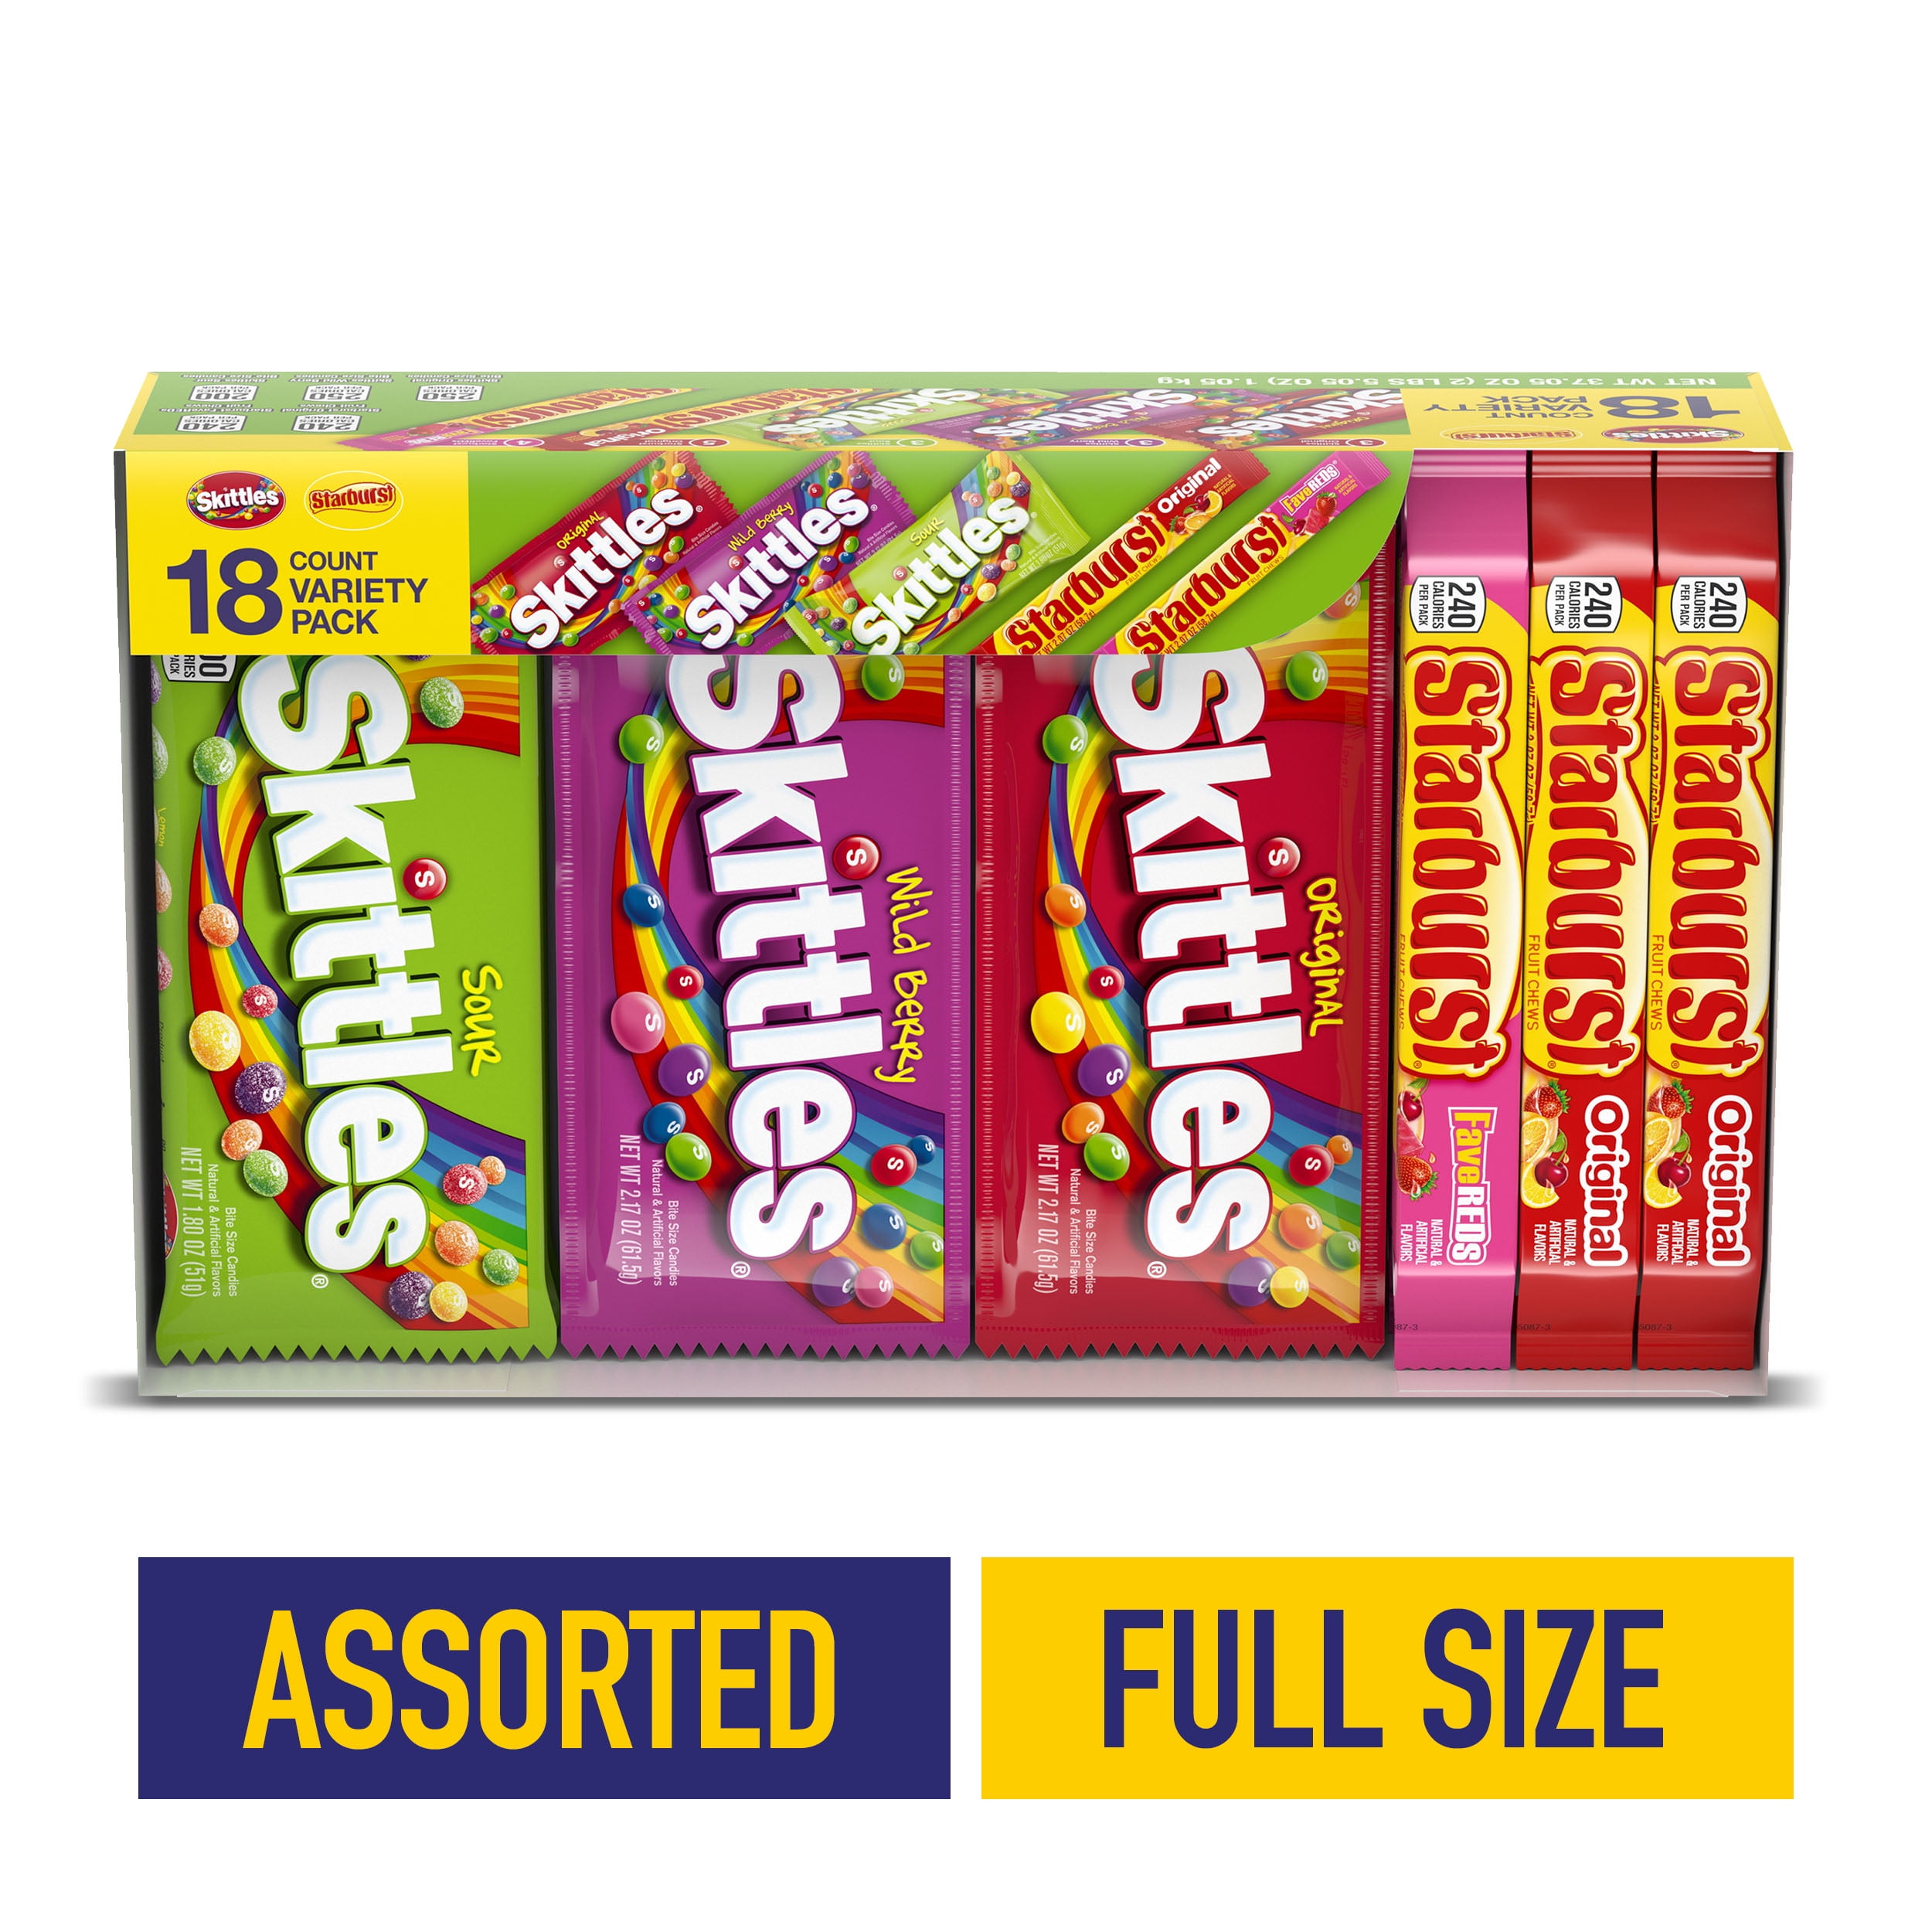 Starburst Skittles Assorted Single Size Candy 37 05 Oz 18 Pack